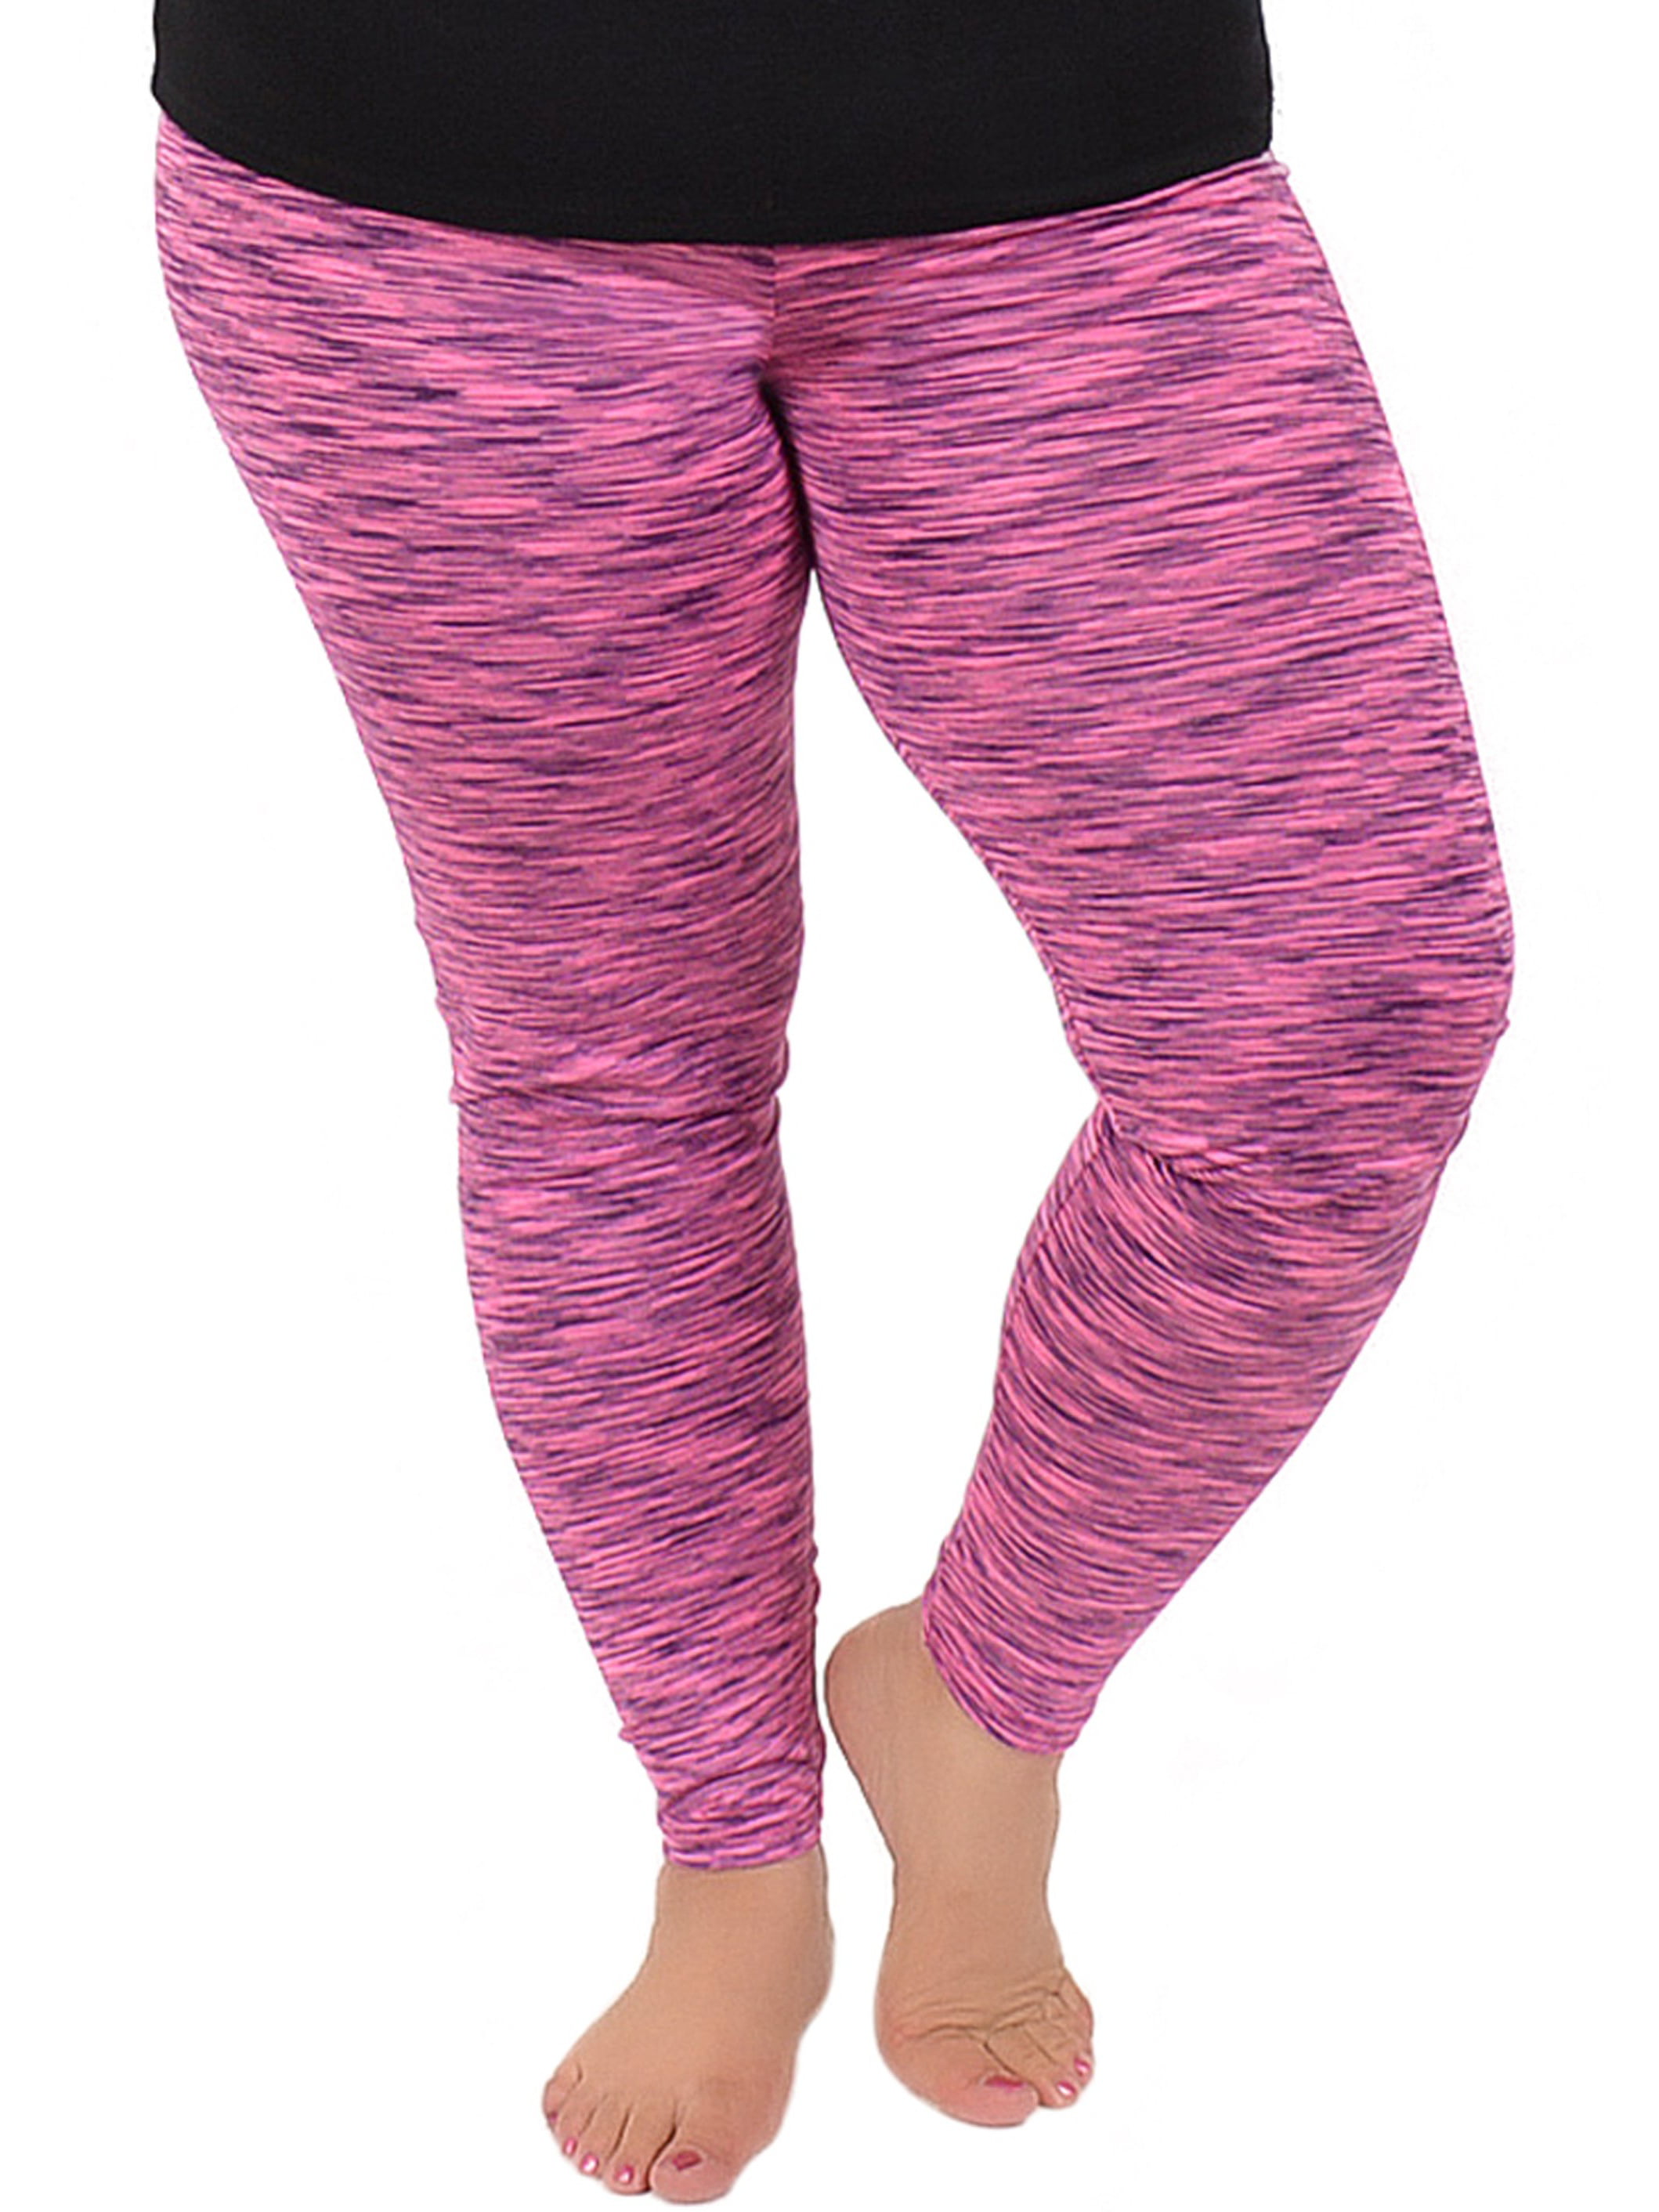 What Size Is A Large In Women's Leggings Wholesale